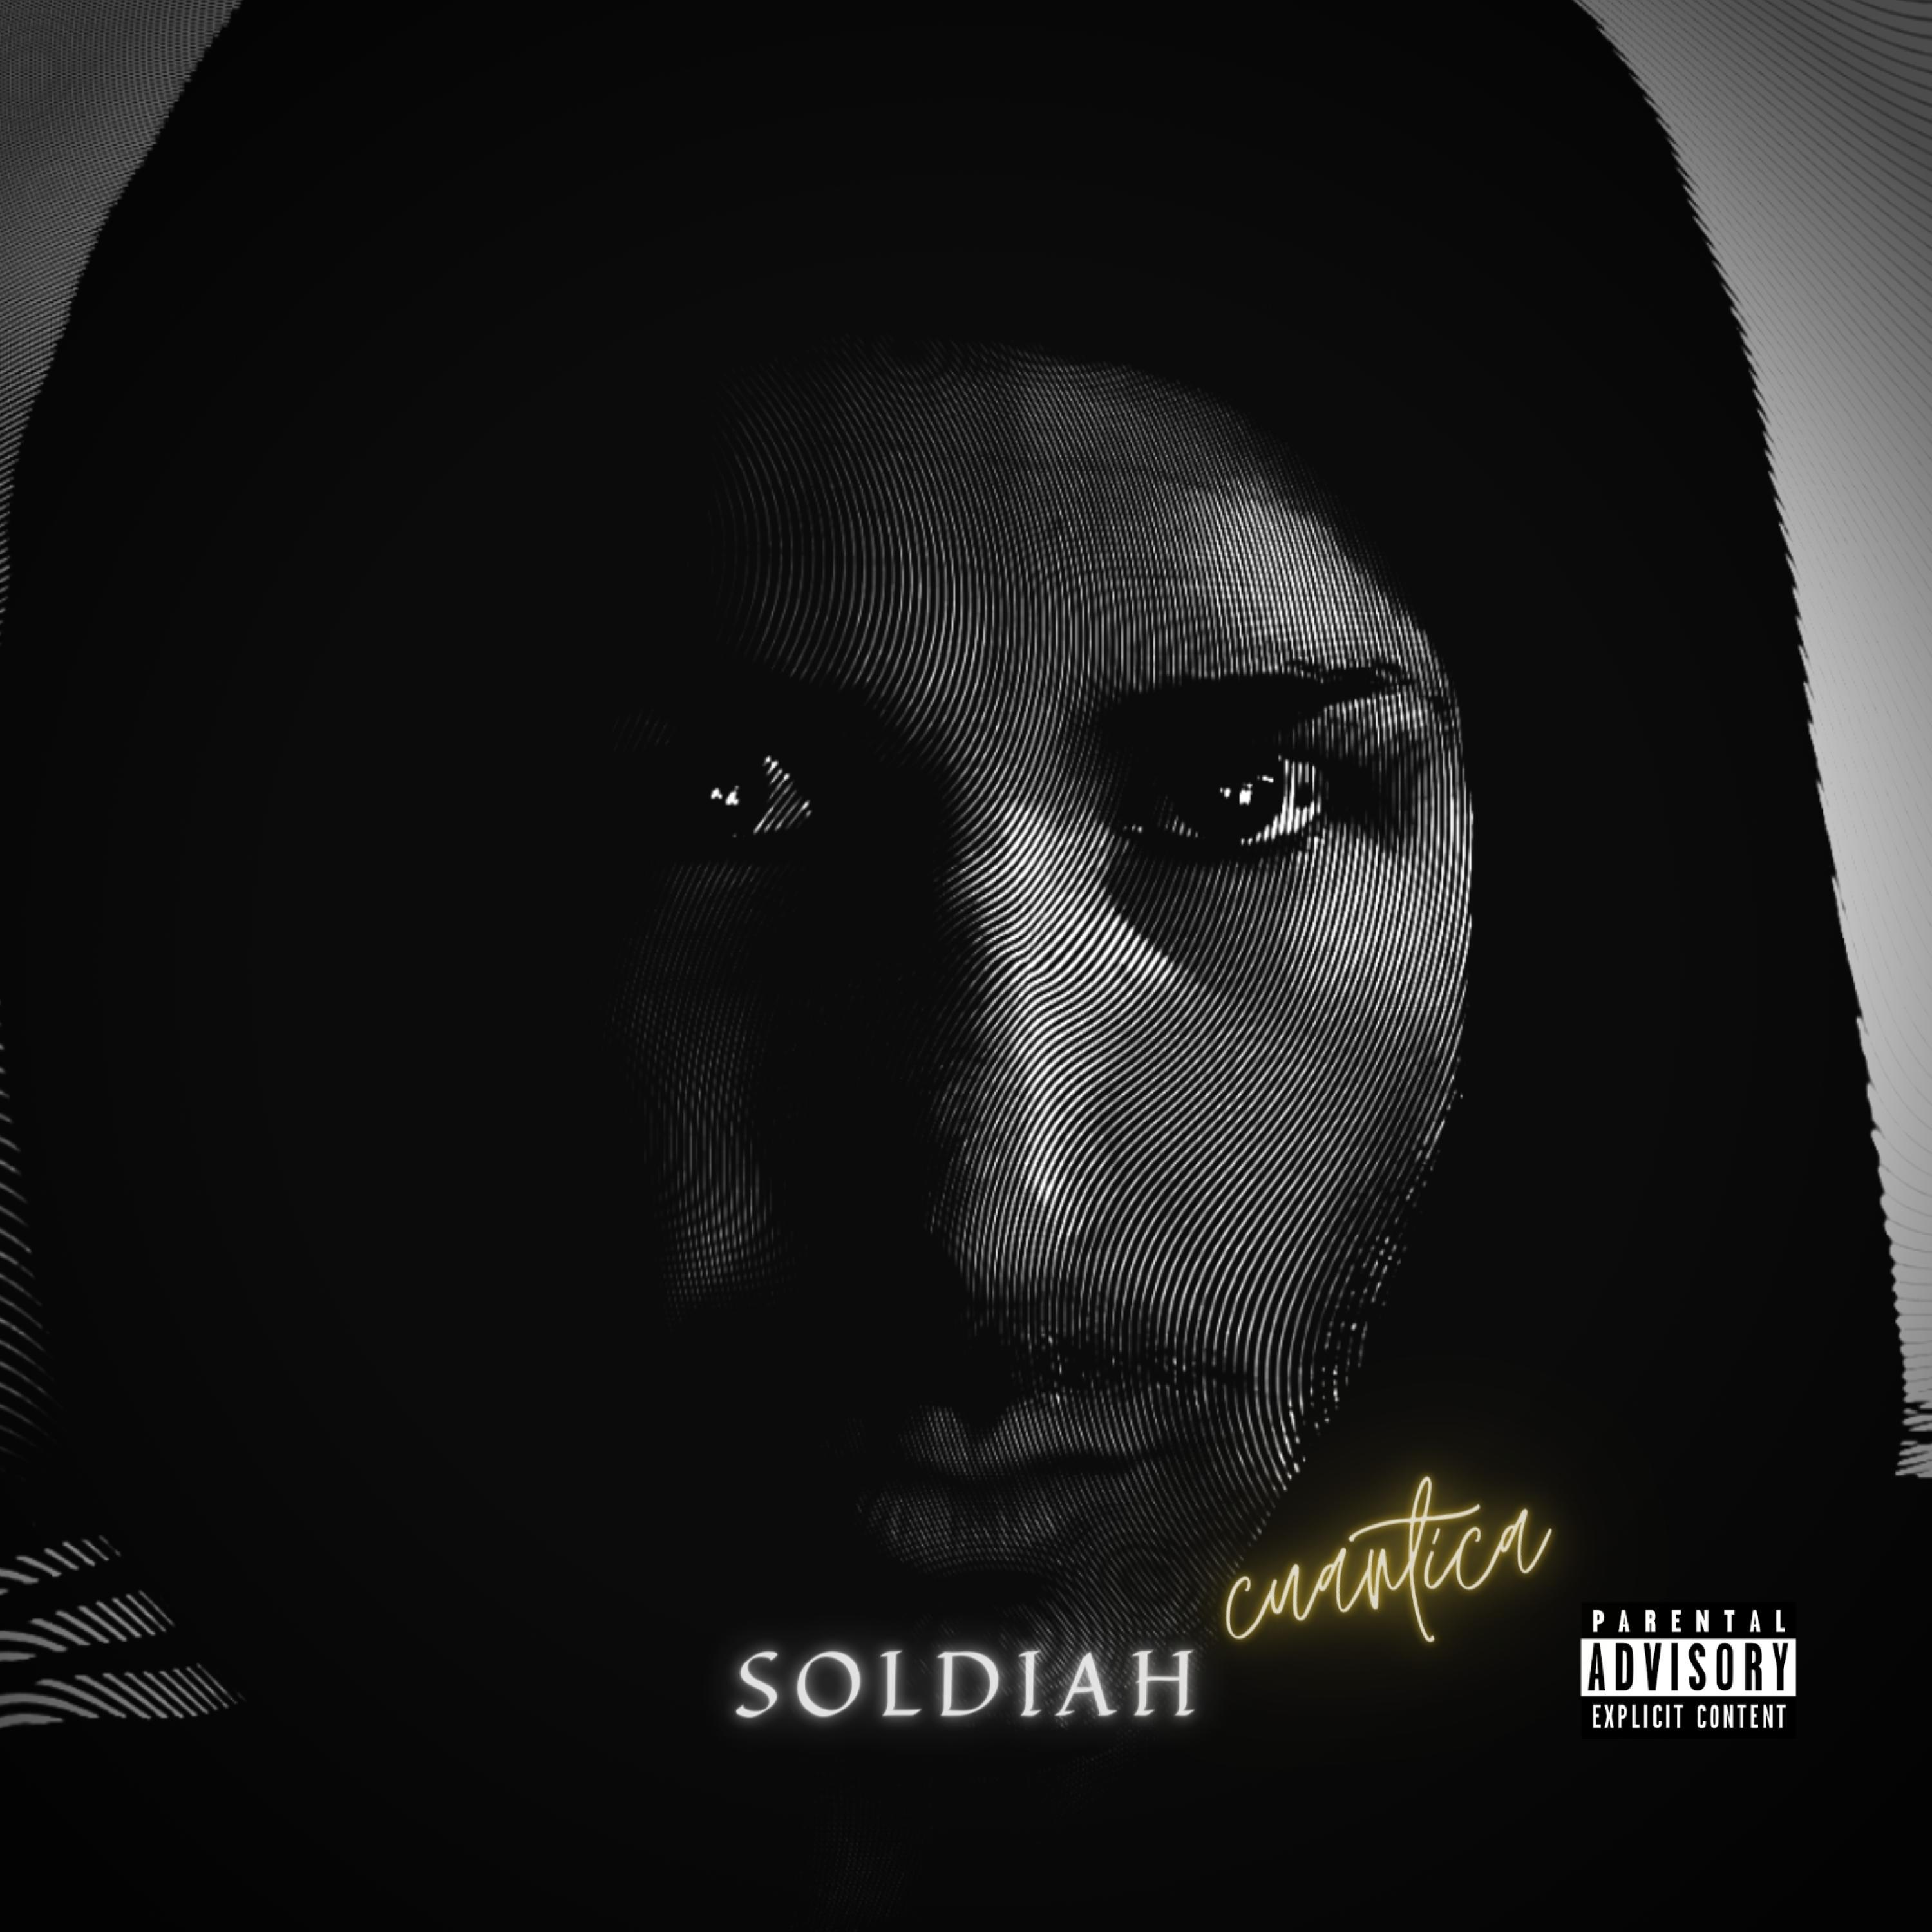 Soldiah - cuantica (feat. chains)